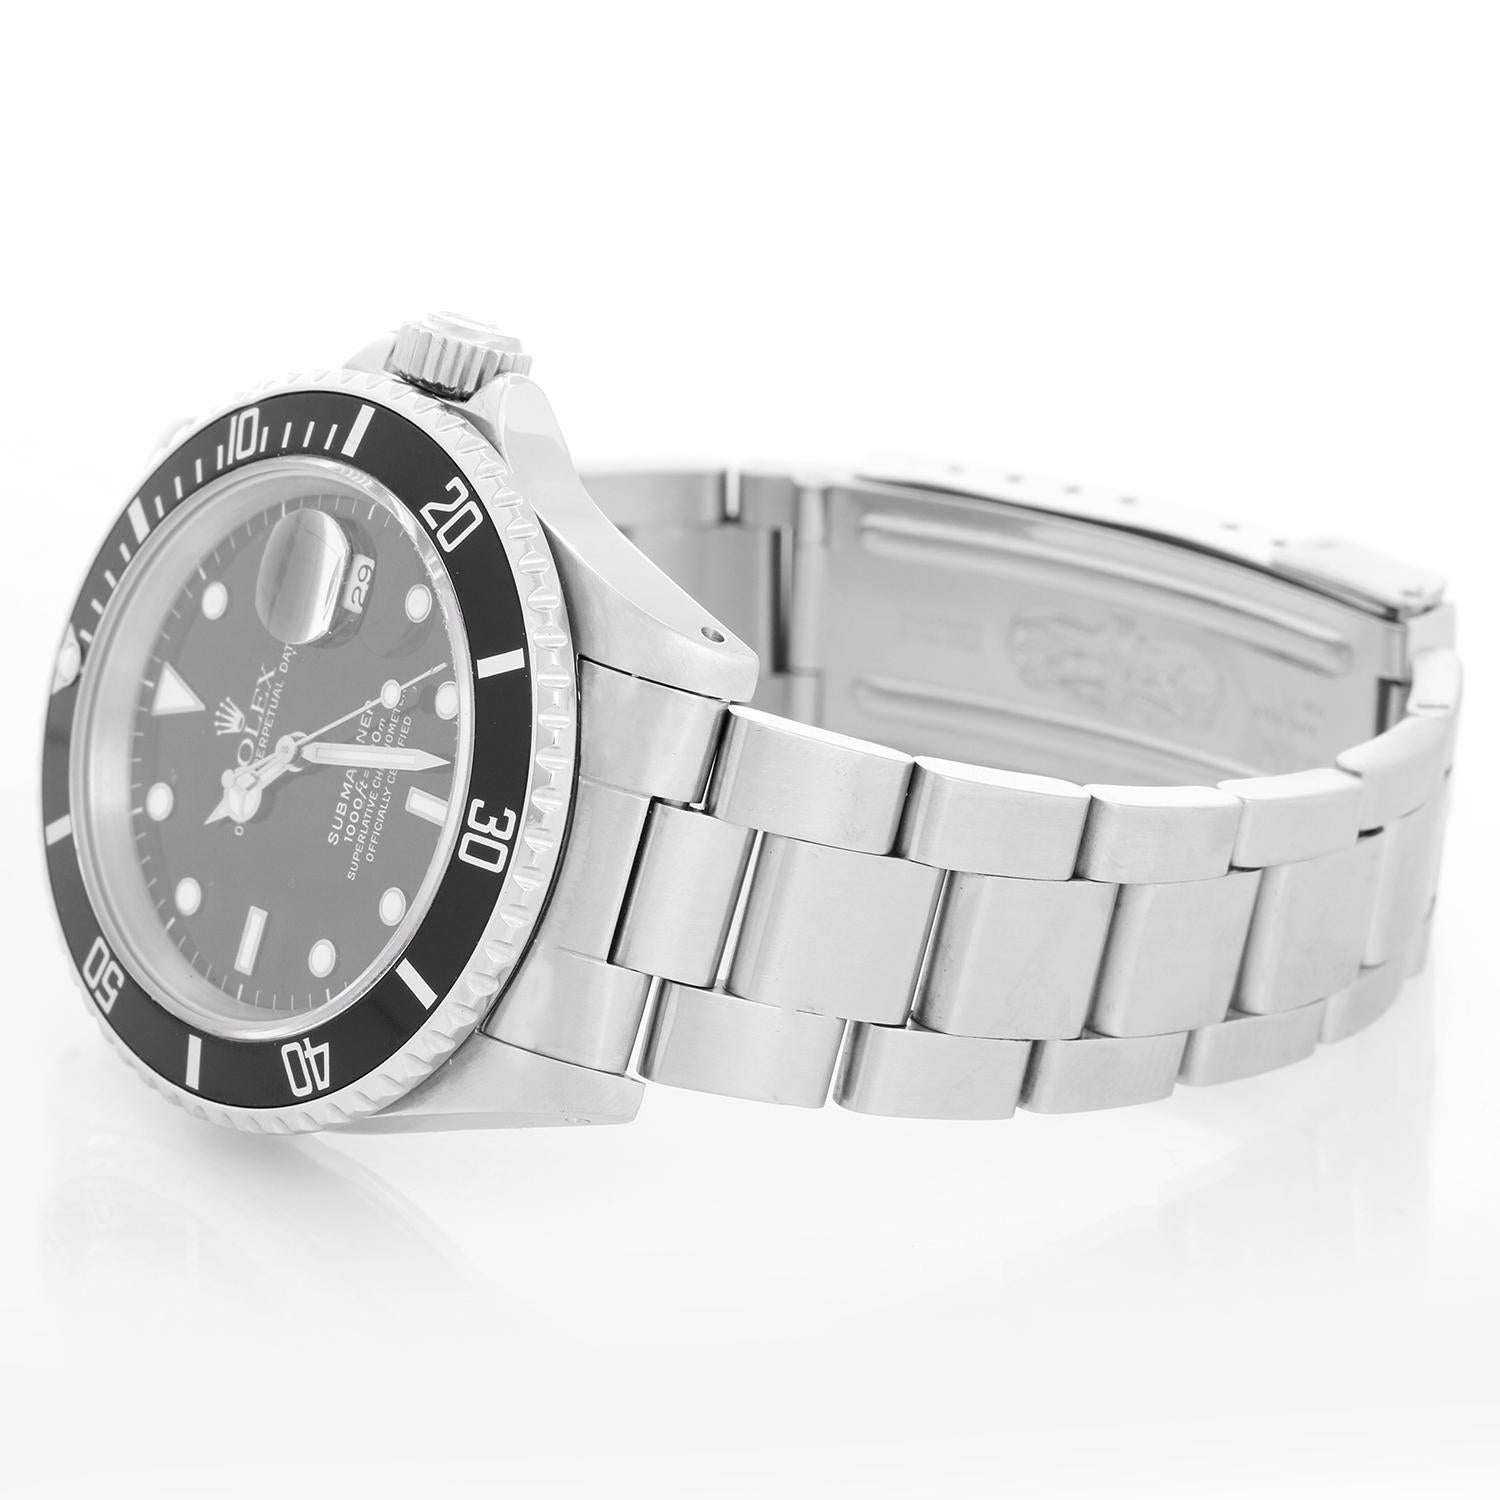 Rolex Submariner 16610 Stainless Steel Men's Watch - Automatic winding, 31 jewels, Quickset, sapphire crystal. Stainless steel case; rotating bezel with black insert. Black Dial. Stainless steel Oyster bracelet with flip-lock clasp. Pre-owned with